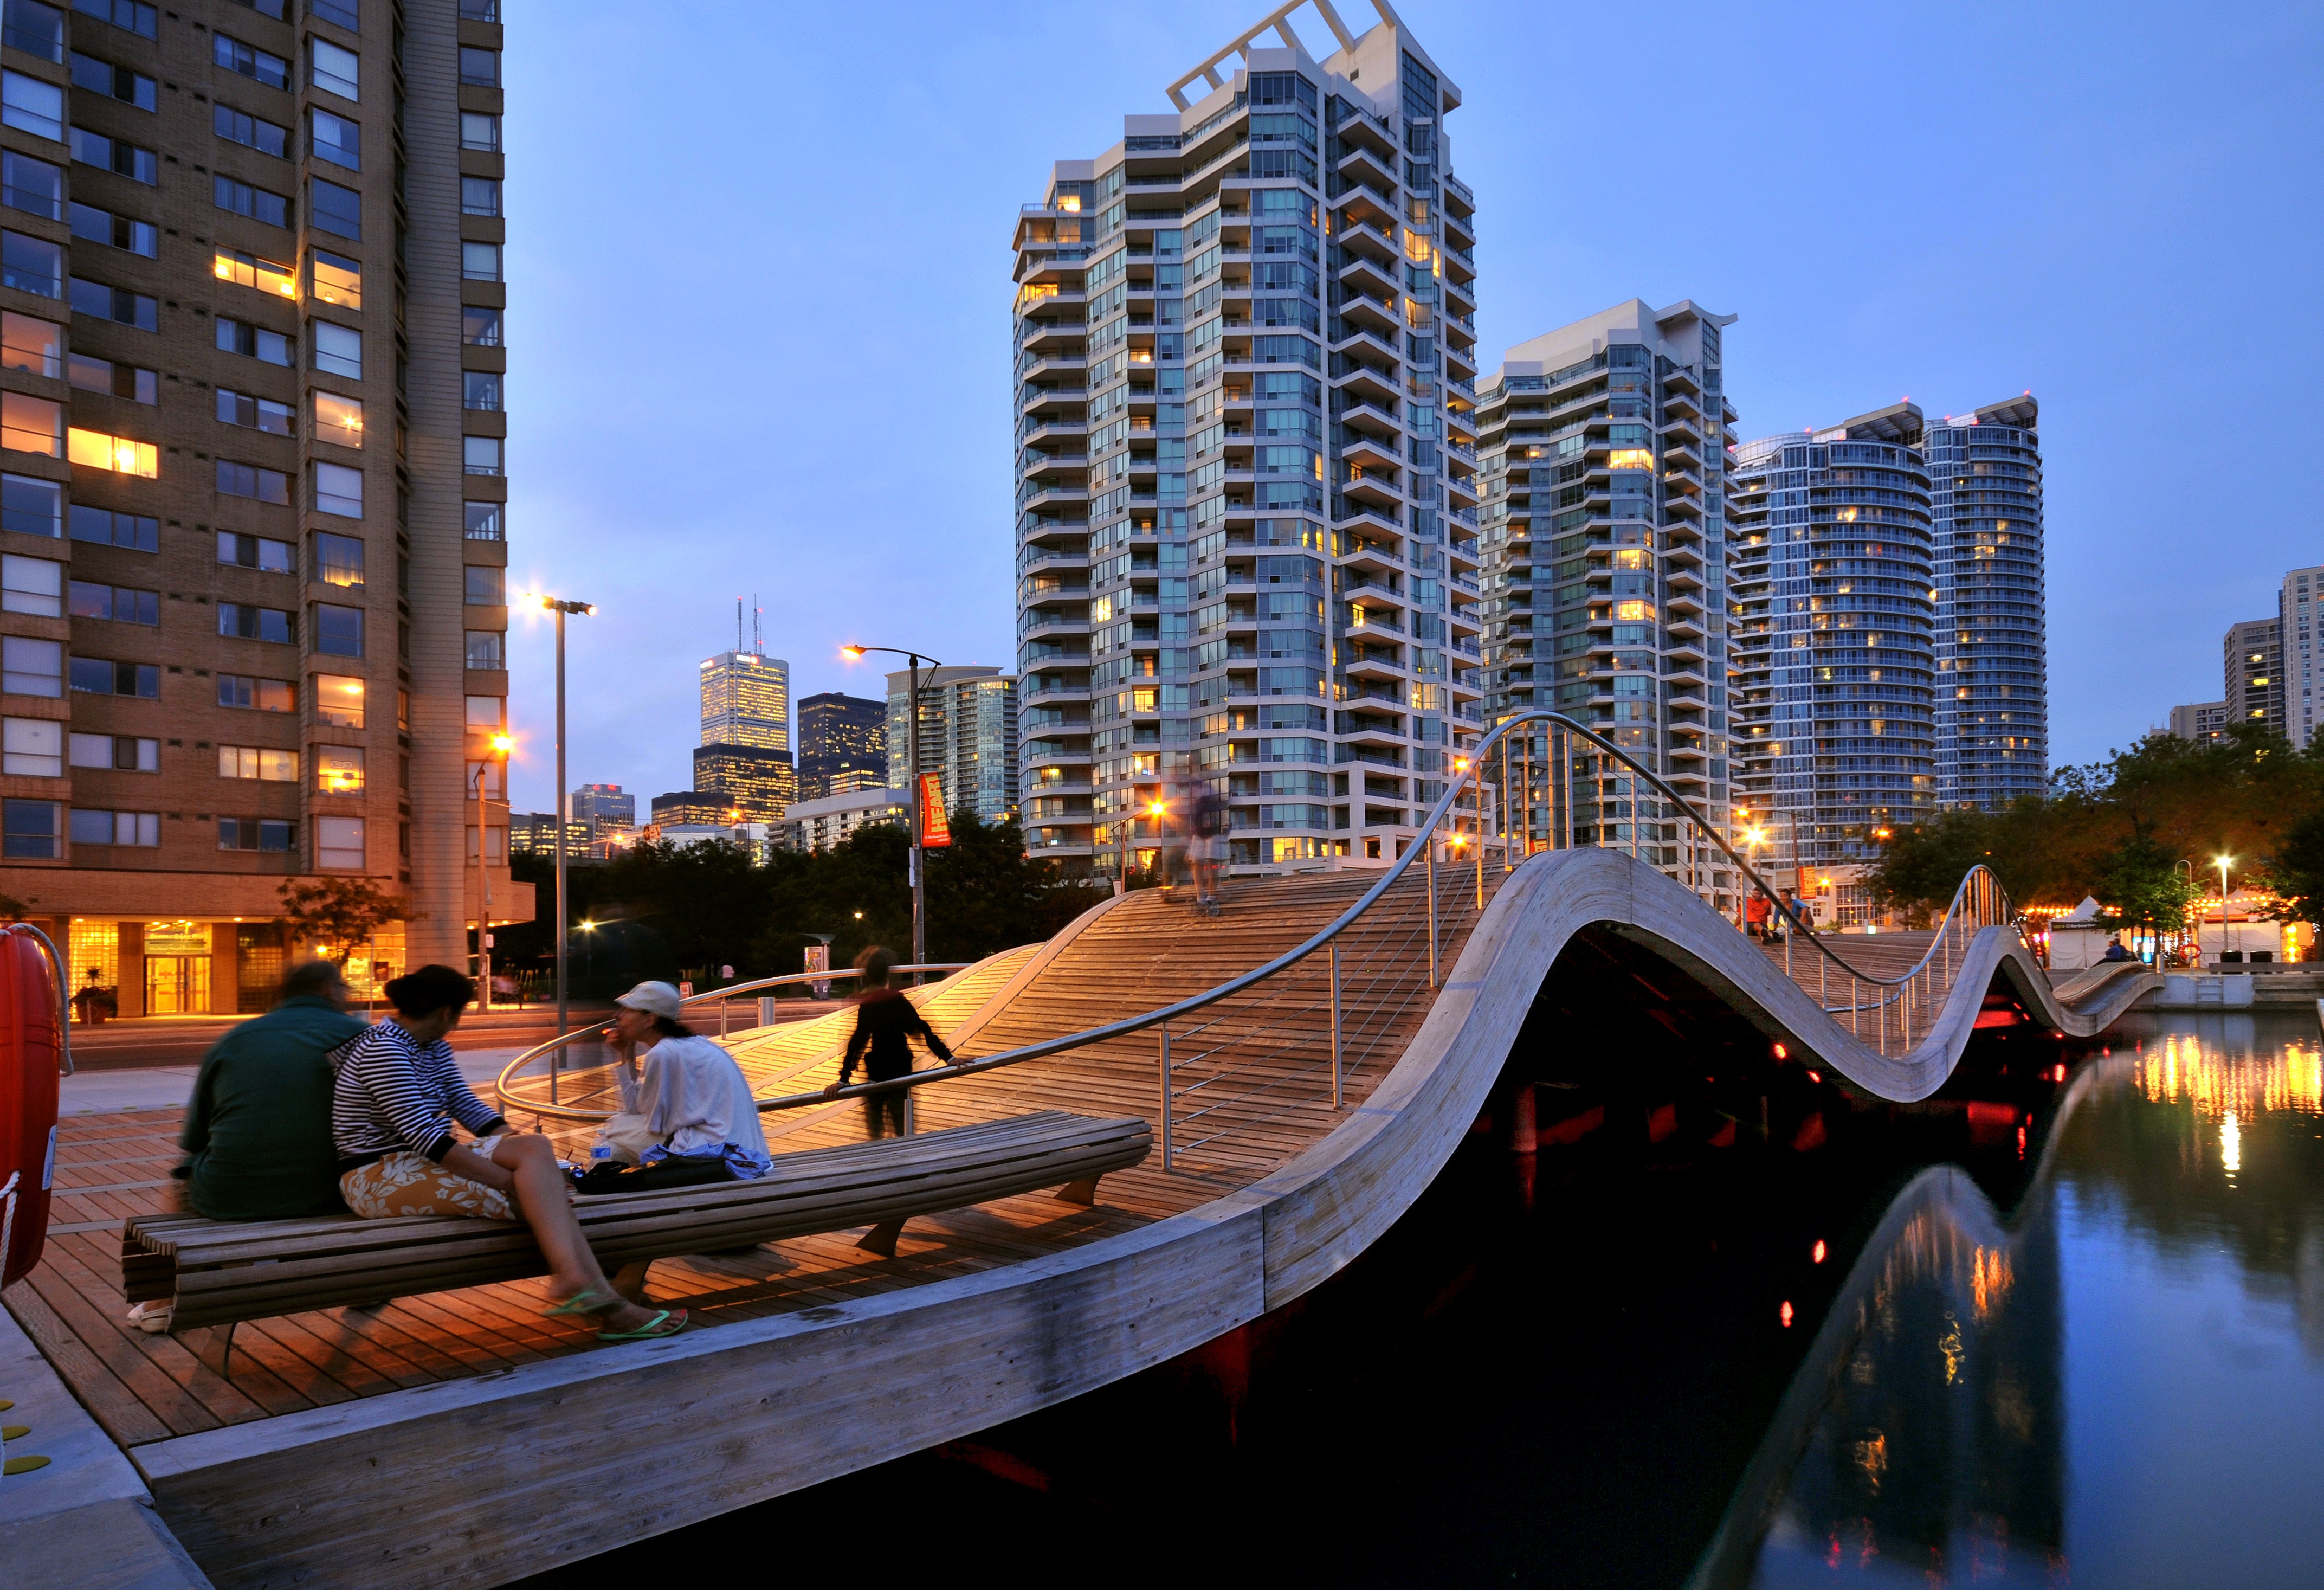 people sitting along the wavedecks benches next to Lake Ontario at dusk - buildings in the background